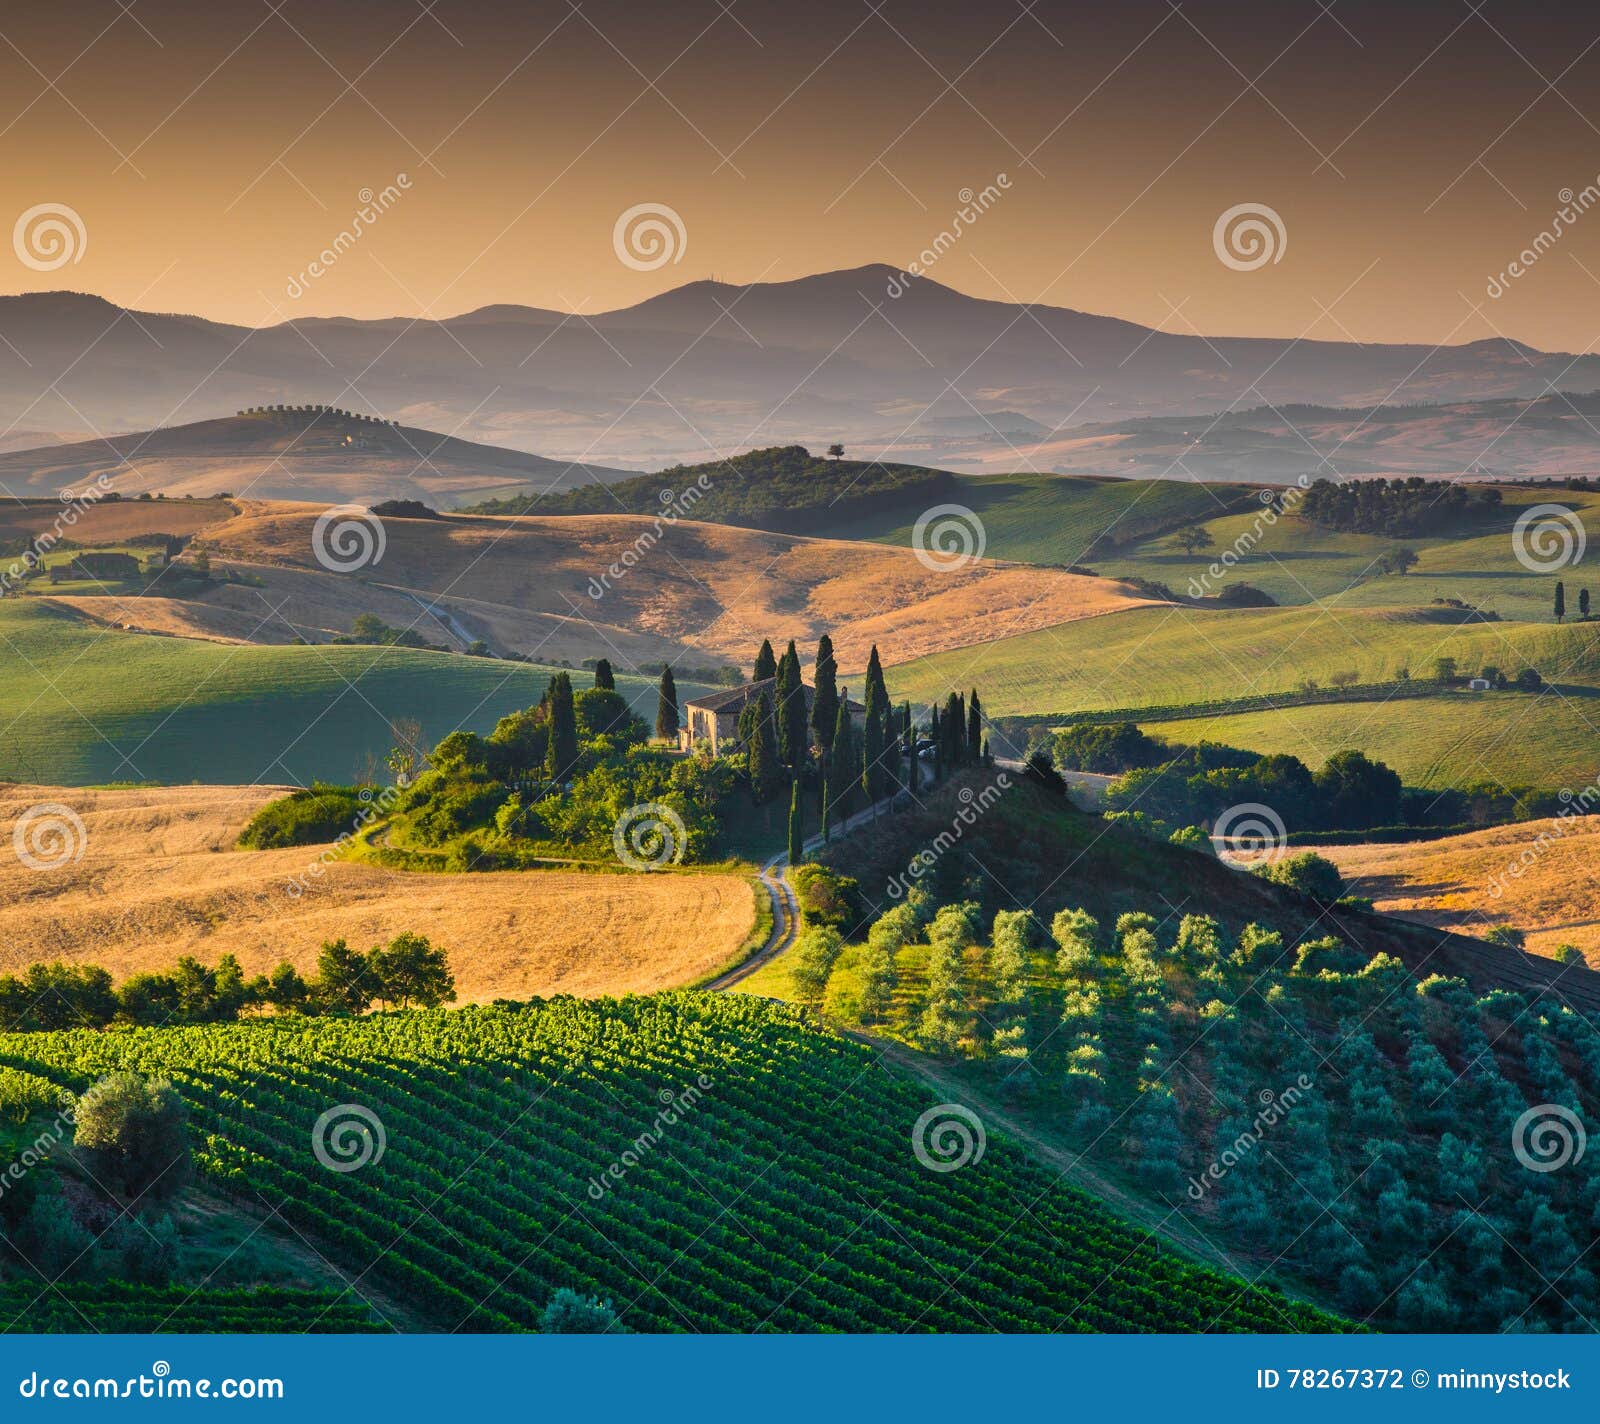 scenic tuscany landscape with rolling hills and valleys at sunrise